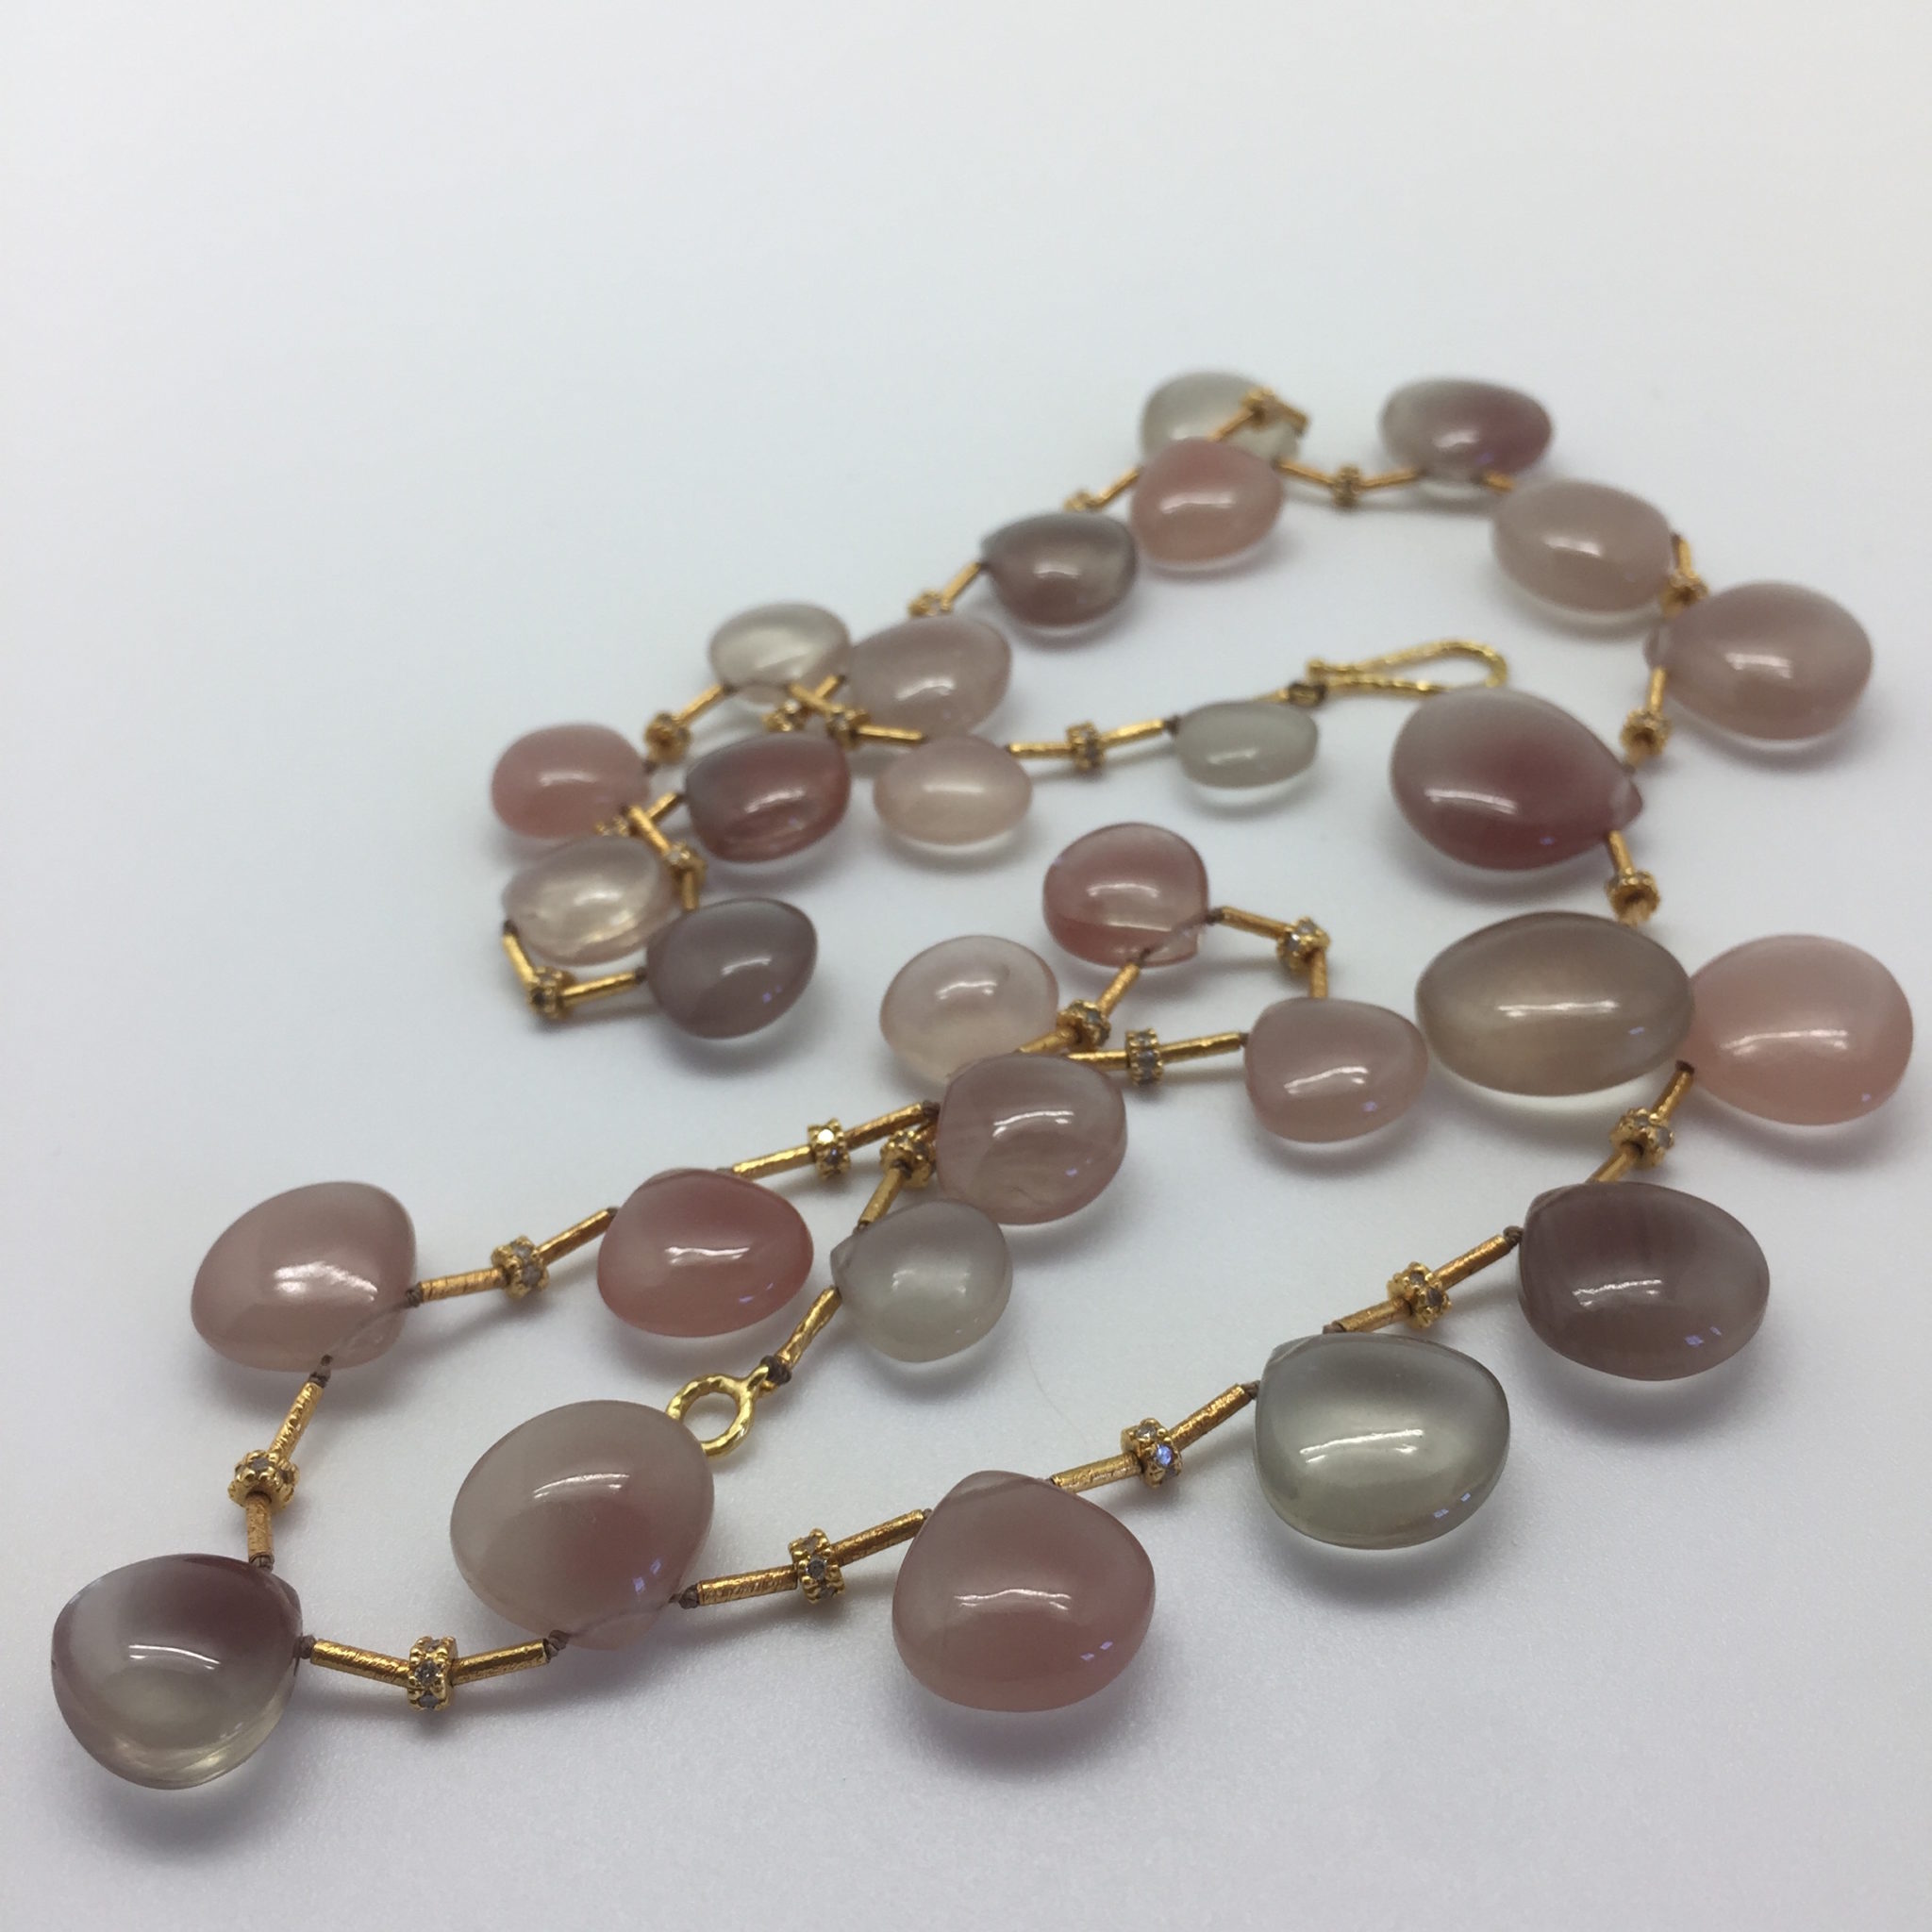 Daydreaming in Sunstones: Sunstone necklace of opaque smooth clam-shaped briolettes spaced with 18K gold tubes and 14K rondelle beads studded with diamonds. Item N00006 detail photo 05